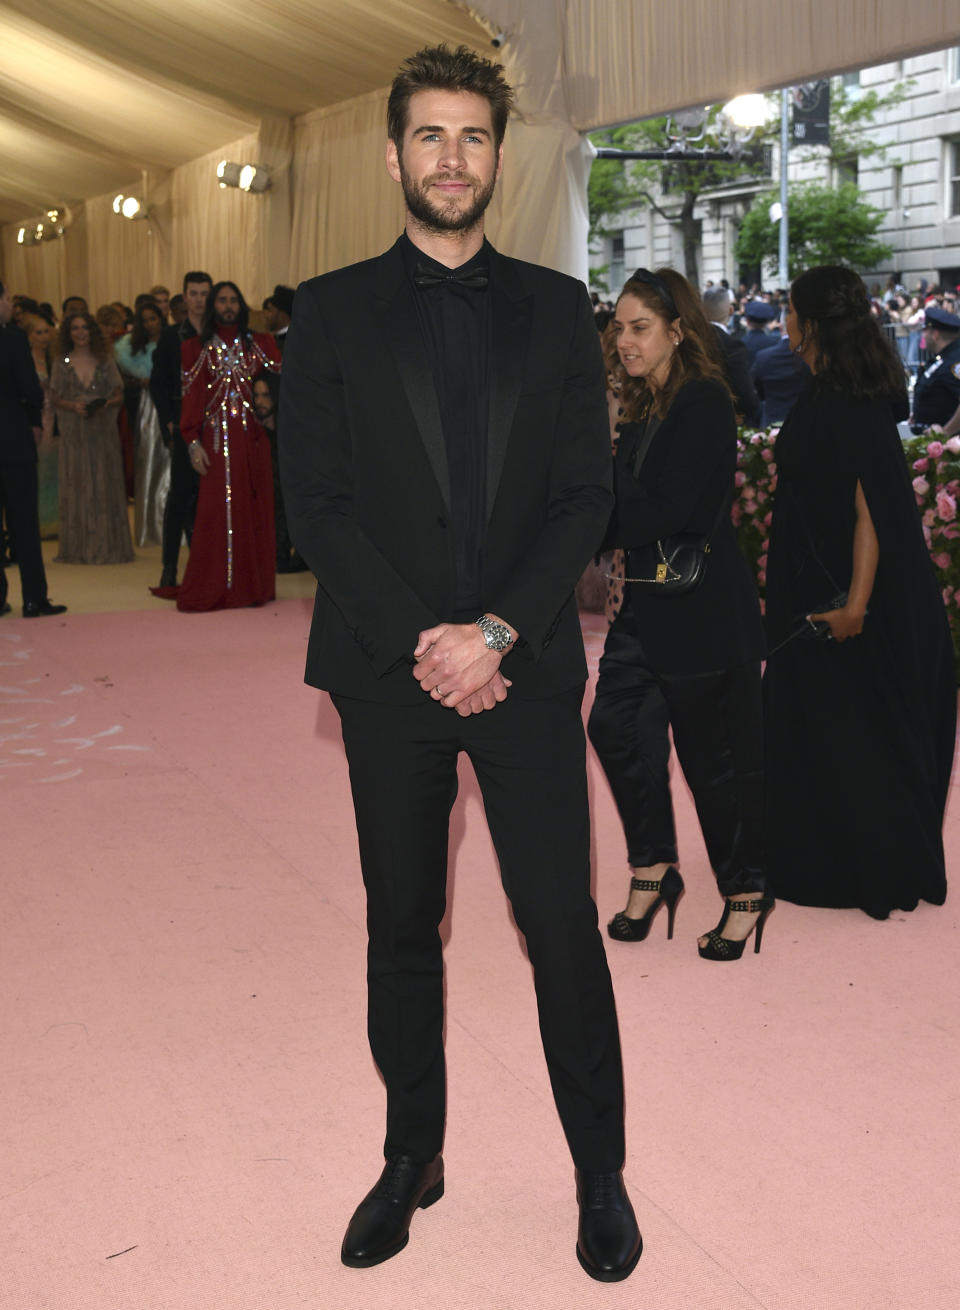 FILE - Liam Hemsworth attends The Metropolitan Museum of Art's Costume Institute benefit gala celebrating the opening of the "Camp: Notes on Fashion" exhibition on May 6, 2019, in New York. Hemsworth turns 31 on Jan. 13. (Photo by Evan Agostini/Invision/AP, File)